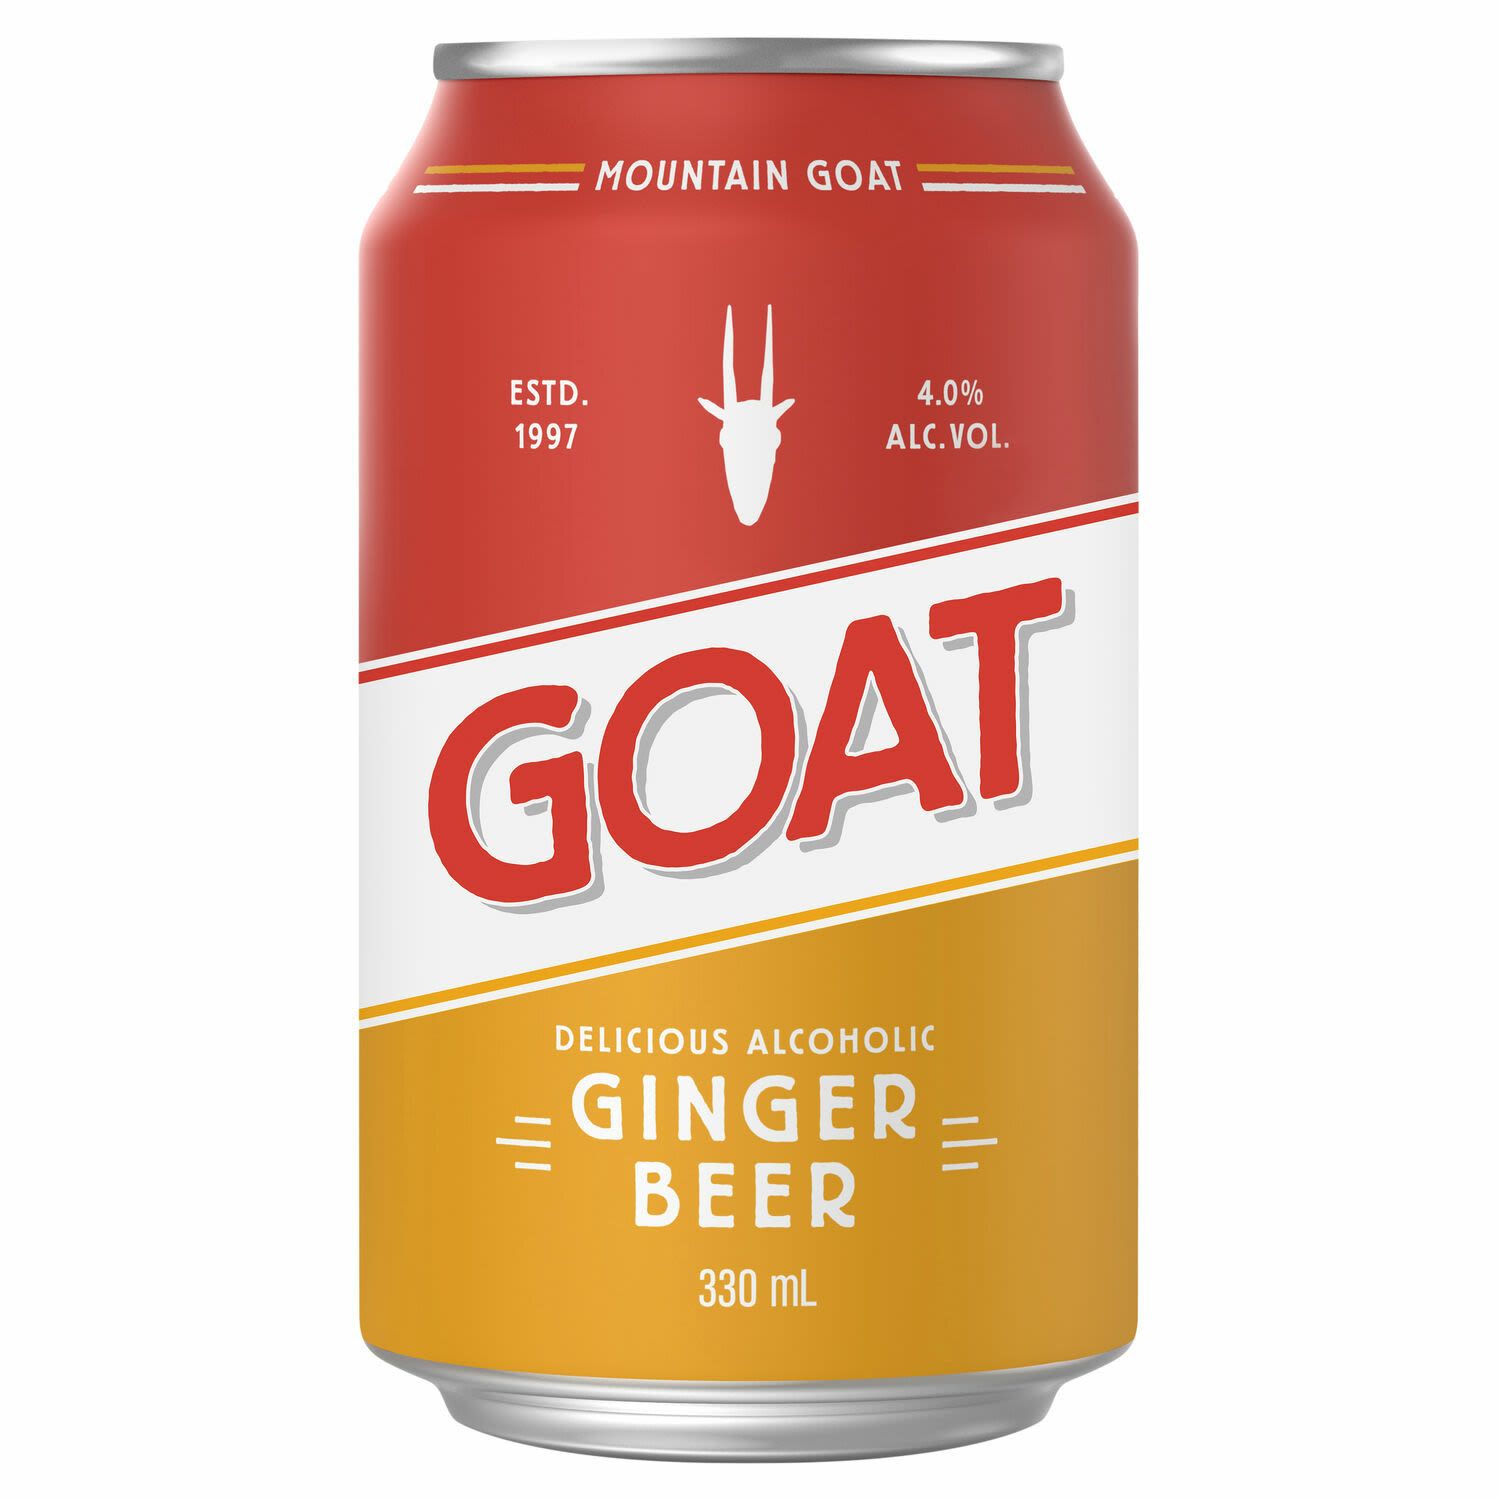 Mountain Goat GOAT Delicious Ginger Beer 4.0% 330mL